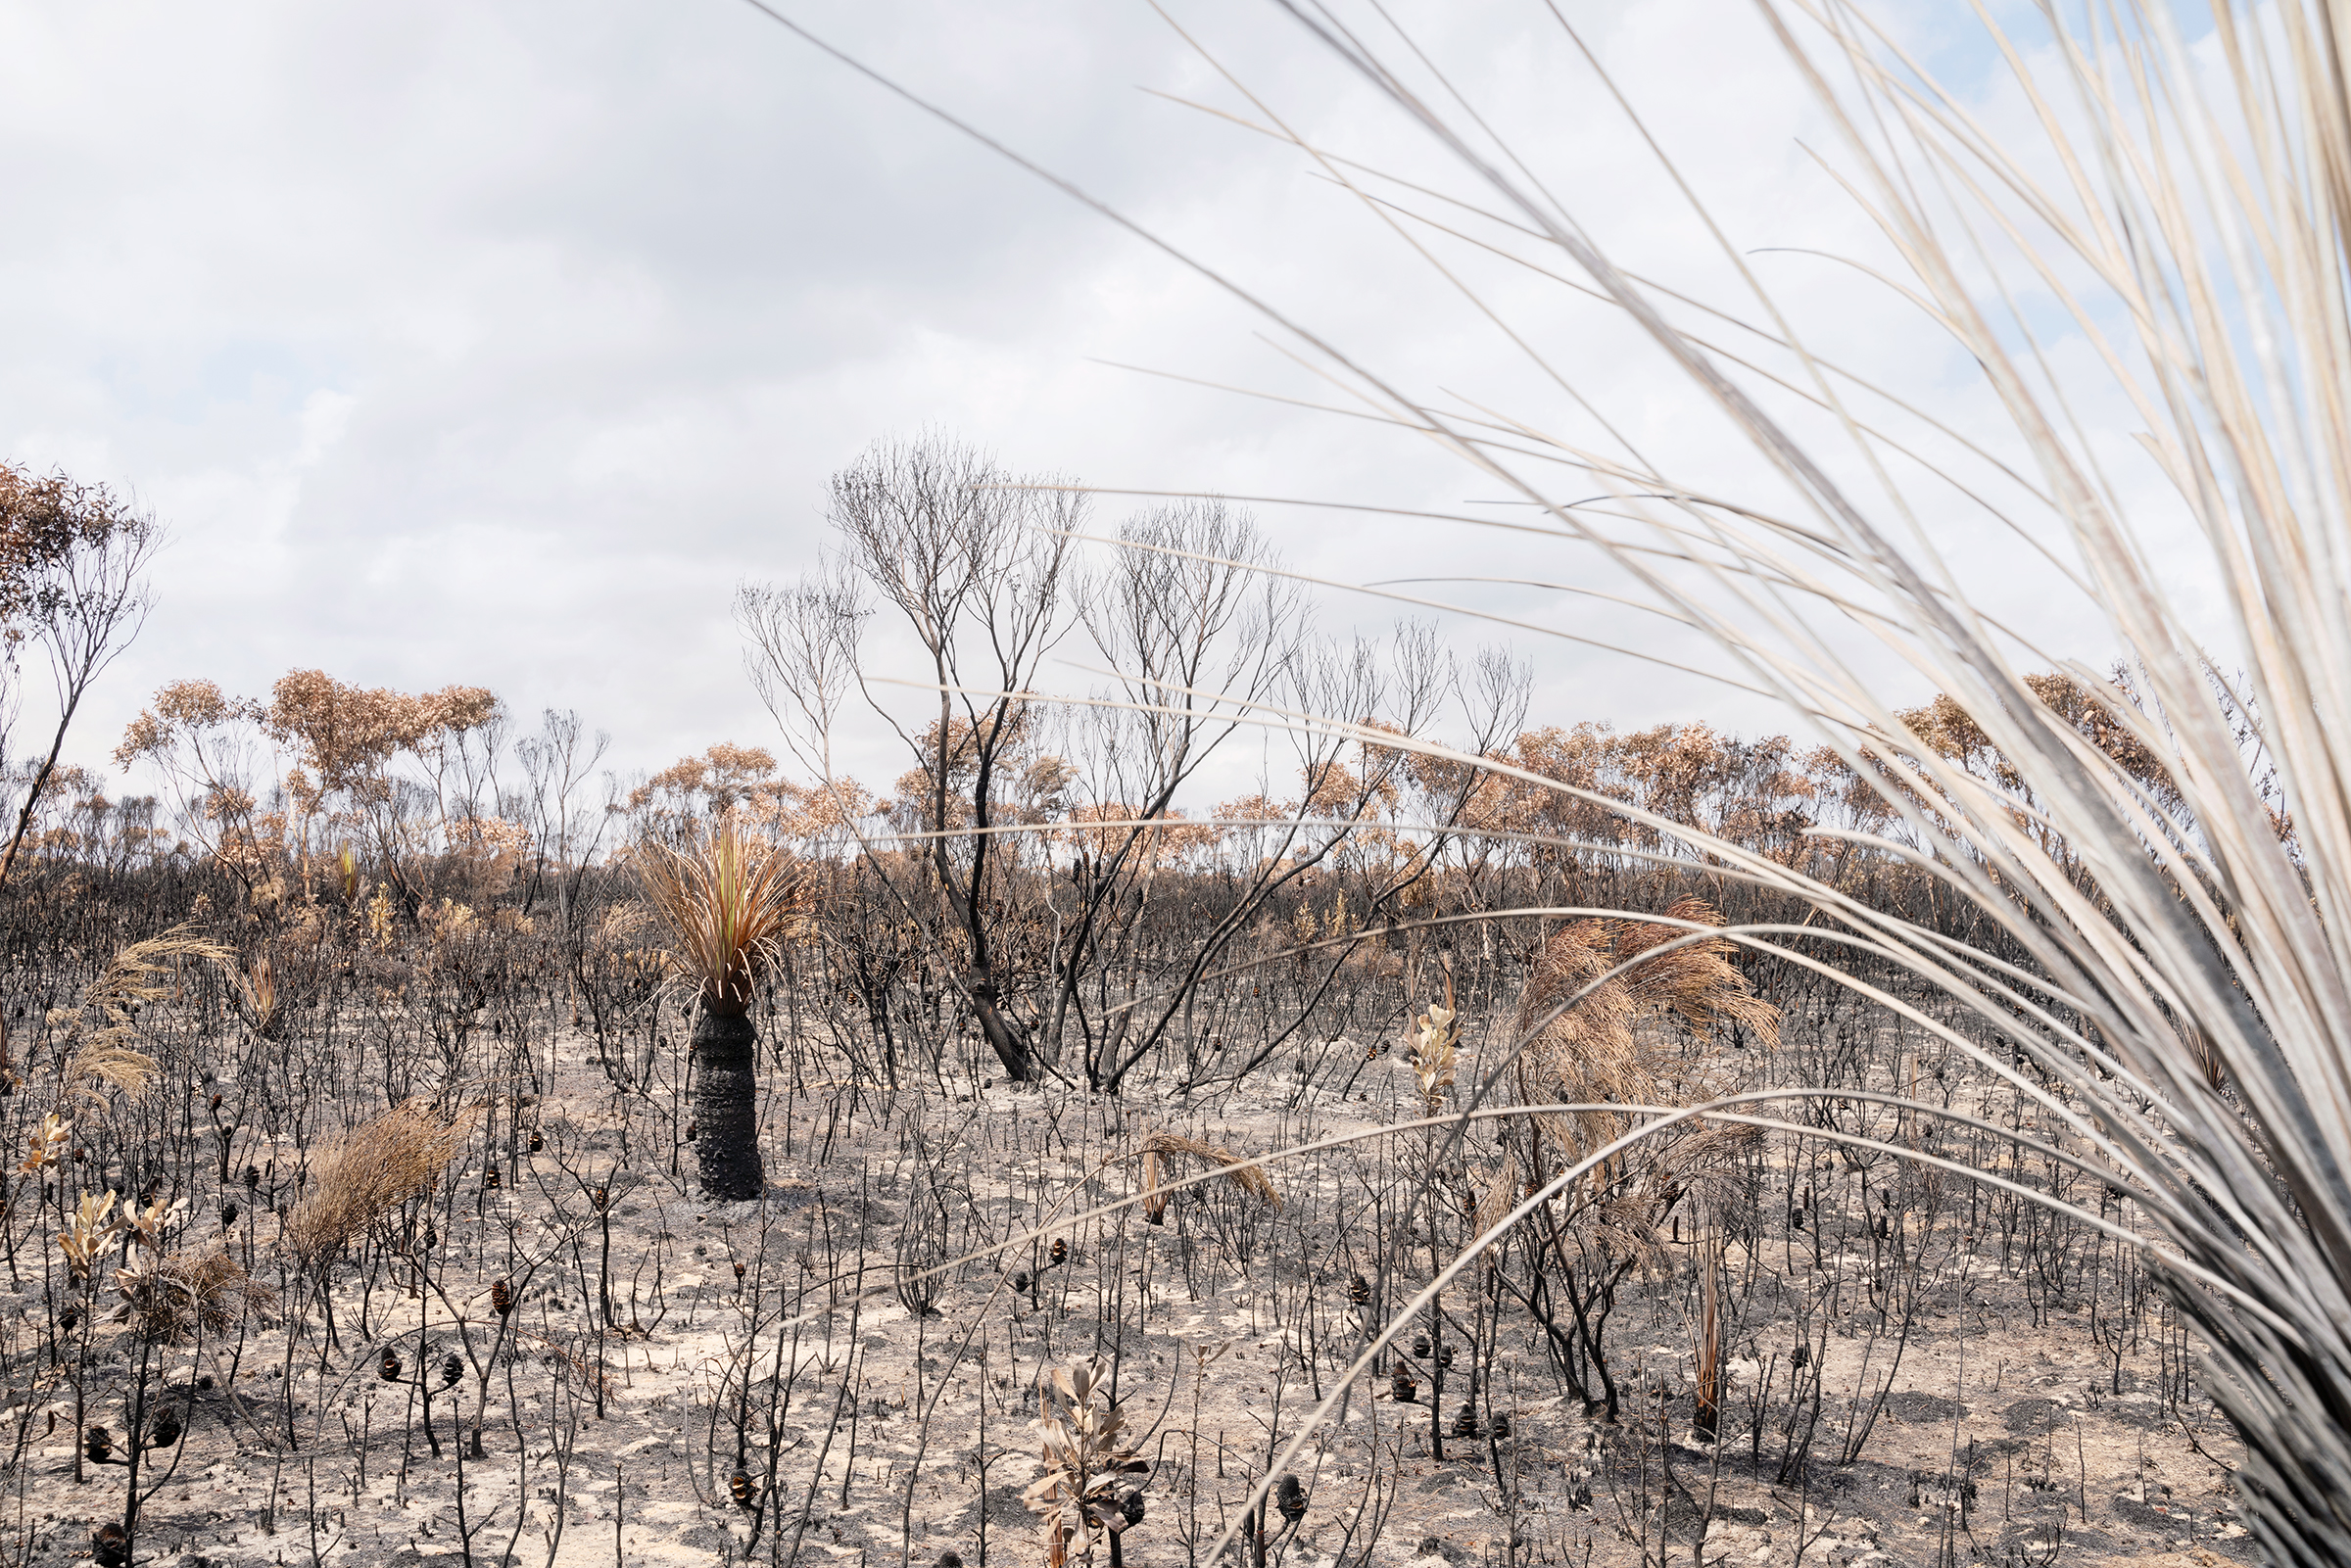 Charred remains of trees in Flinders Chase National Park on Kangaroo Island on Jan. 16. (Adam Ferguson for TIME)